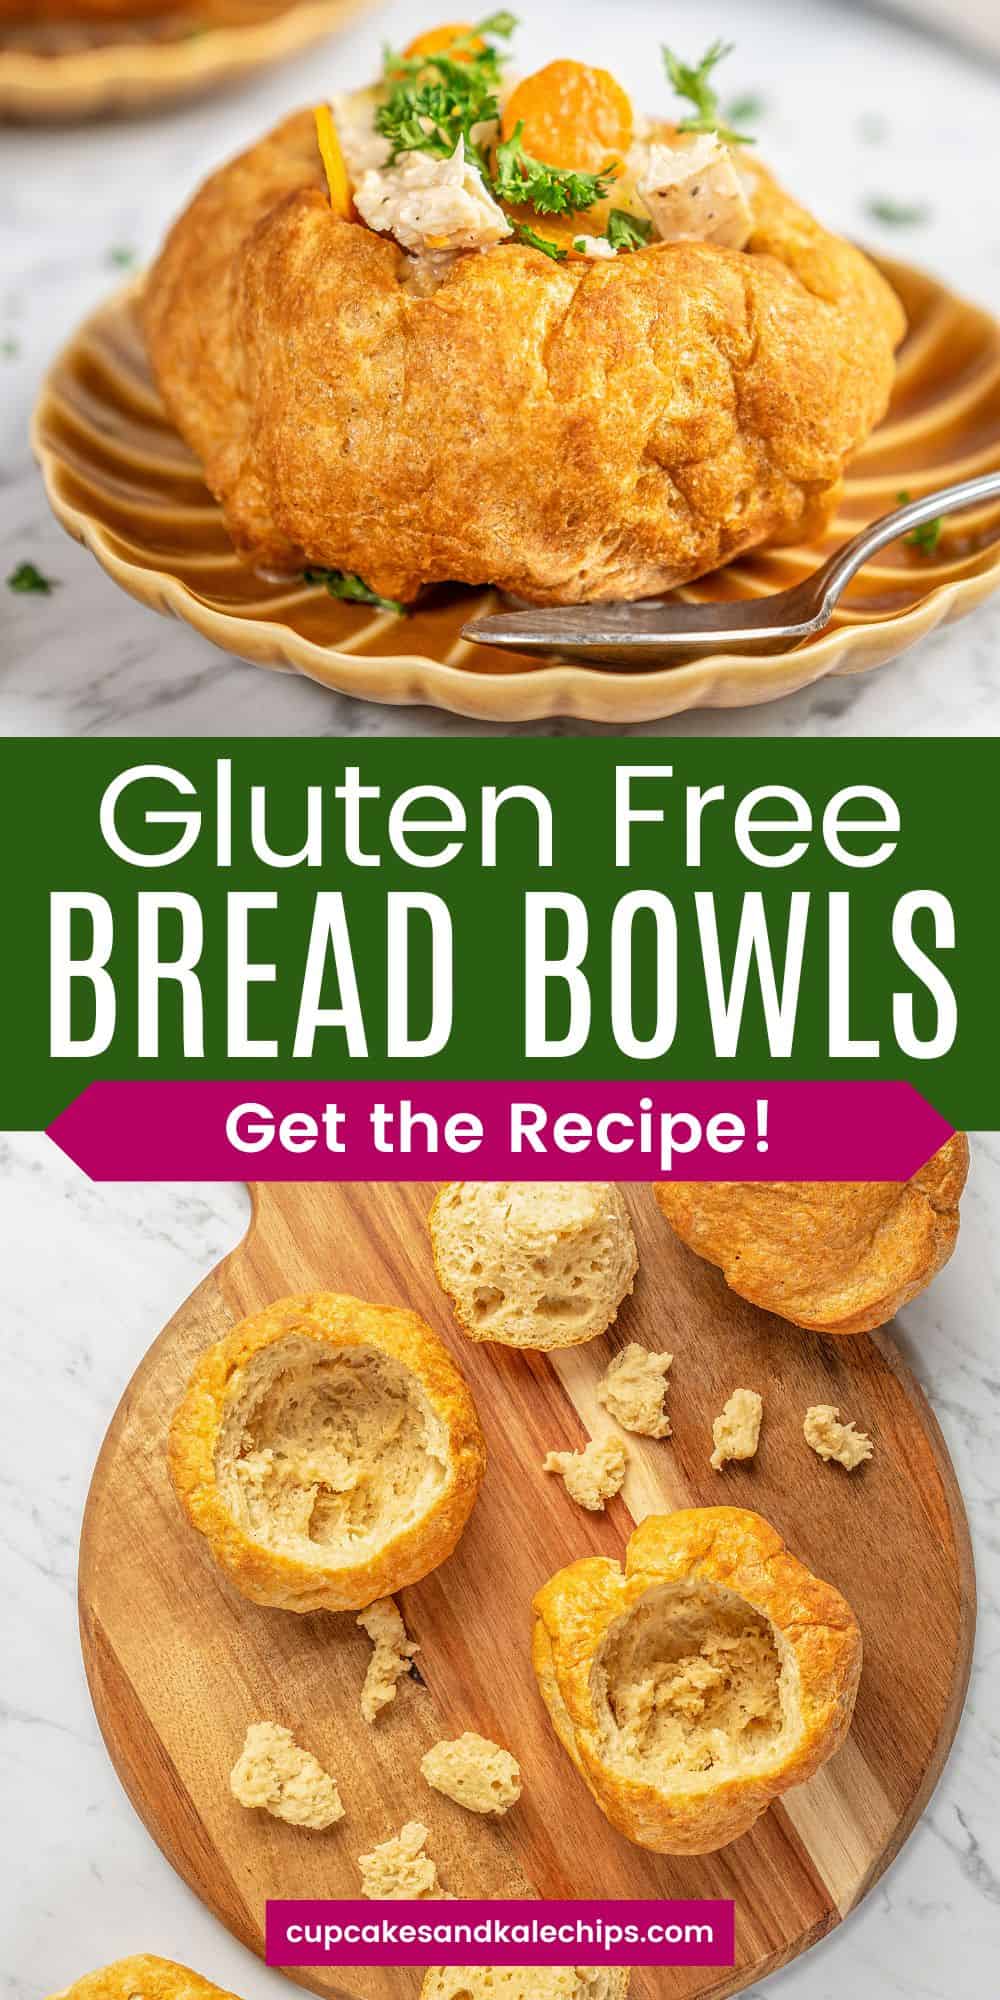 Gluten Free Bread Bowls | Cupcakes & Kale Chips